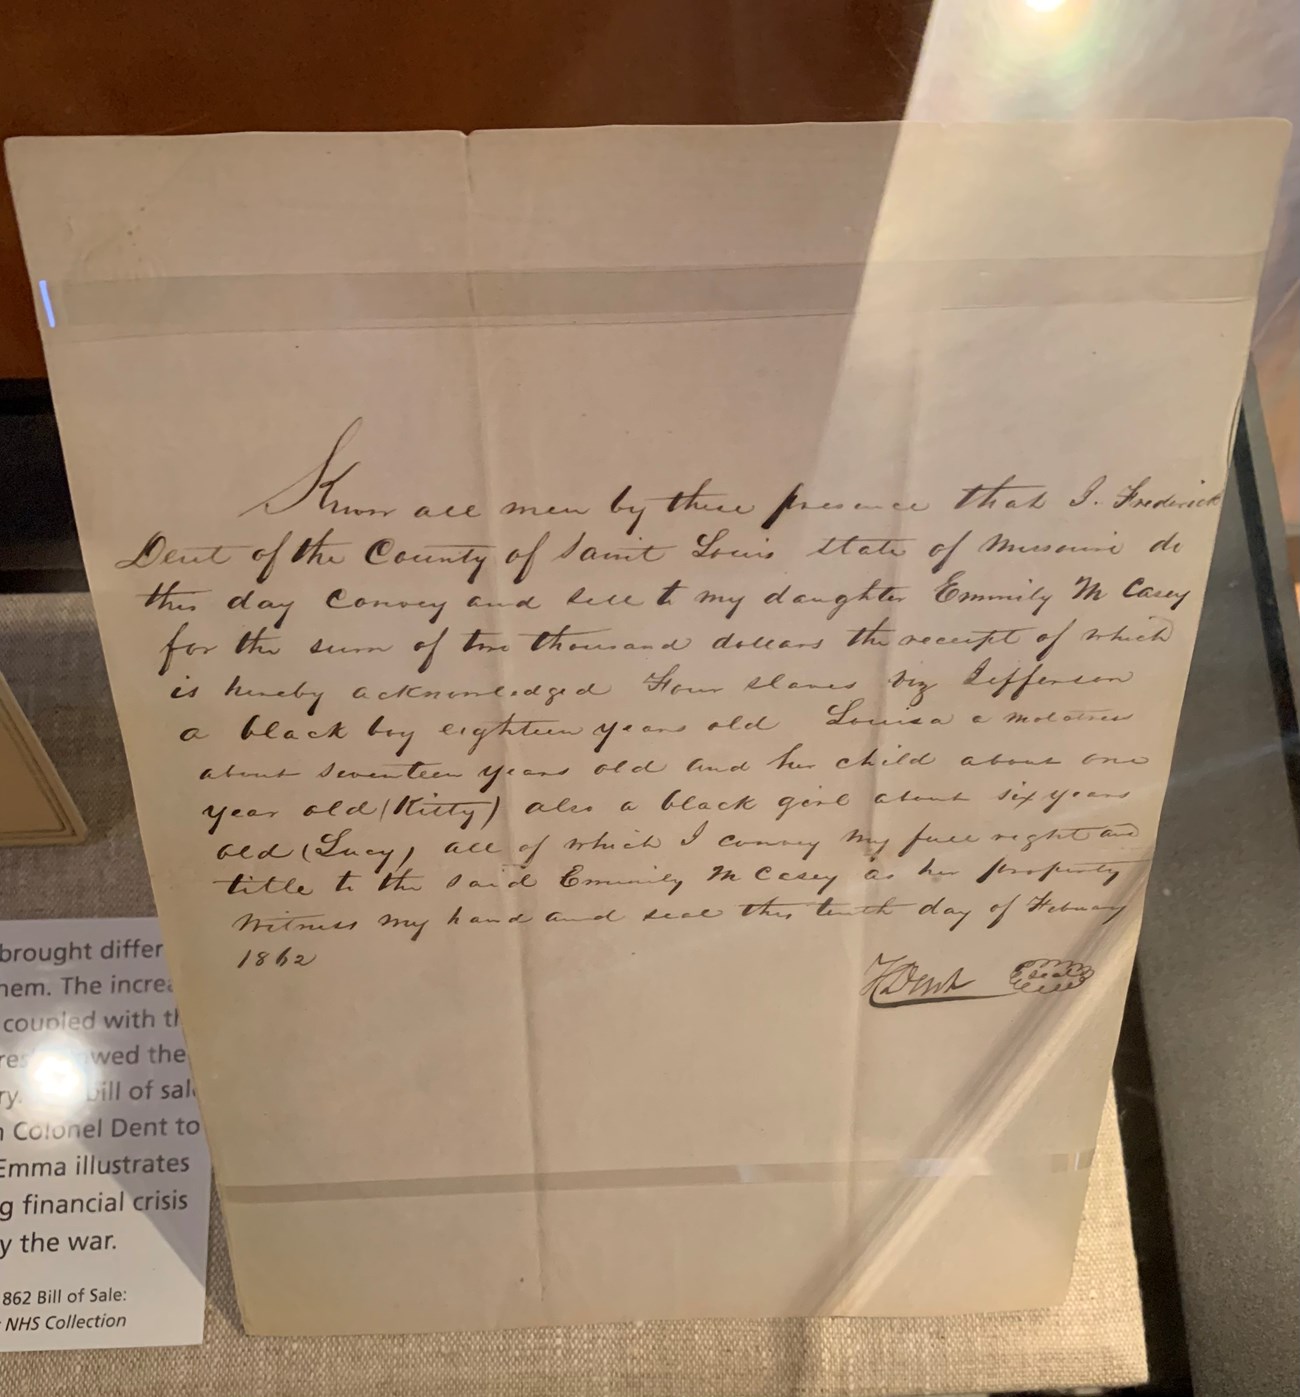 Legal paper with handwritten bill of sale transferring ownership of four enslaved people from Frederick Dent to Emily Casey.